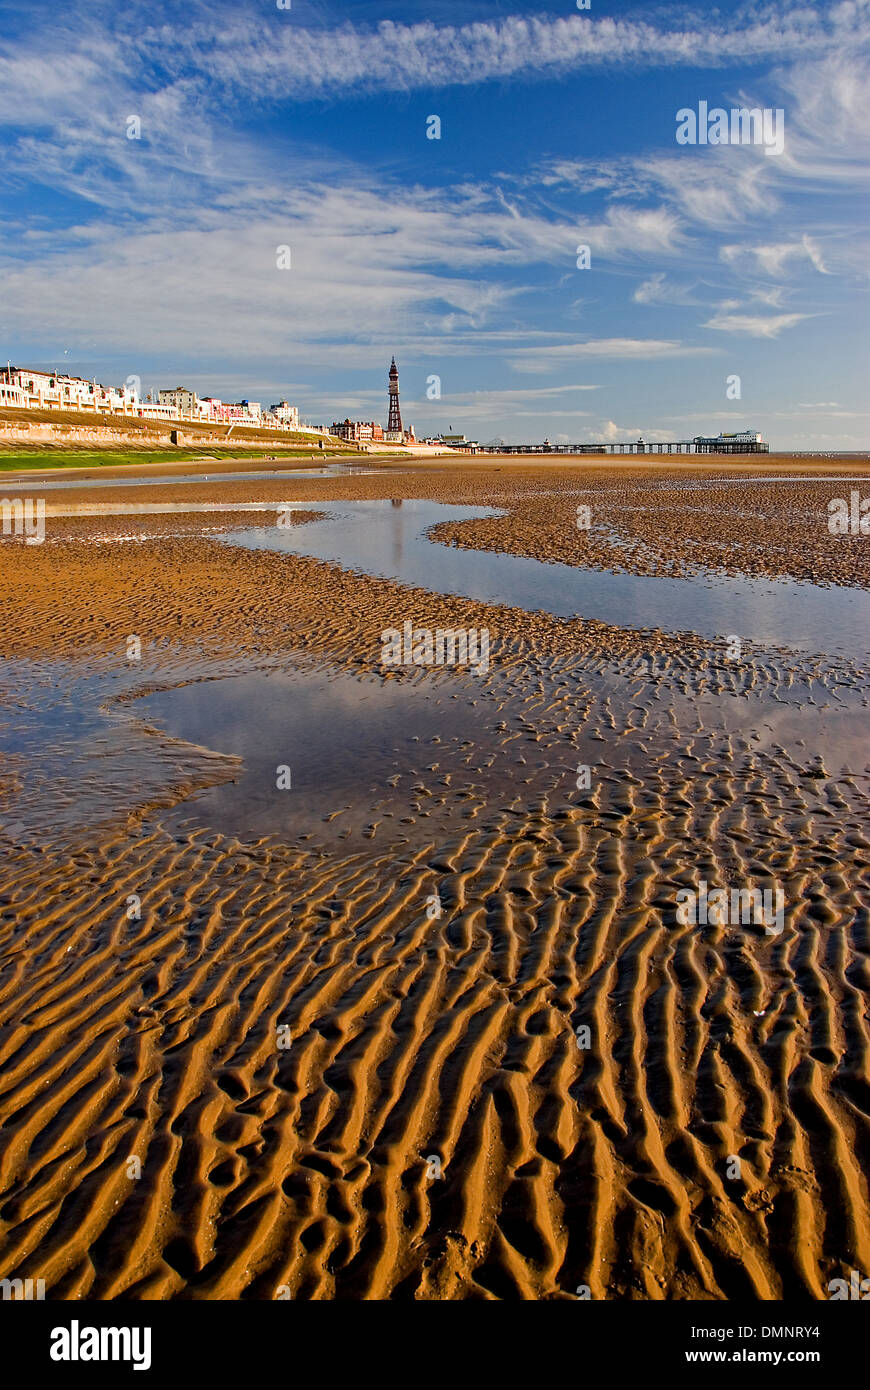 Low tide in the Irish Sea exposes vast areas of rippling sandy beaches along Blackpool's seafront. Stock Photo